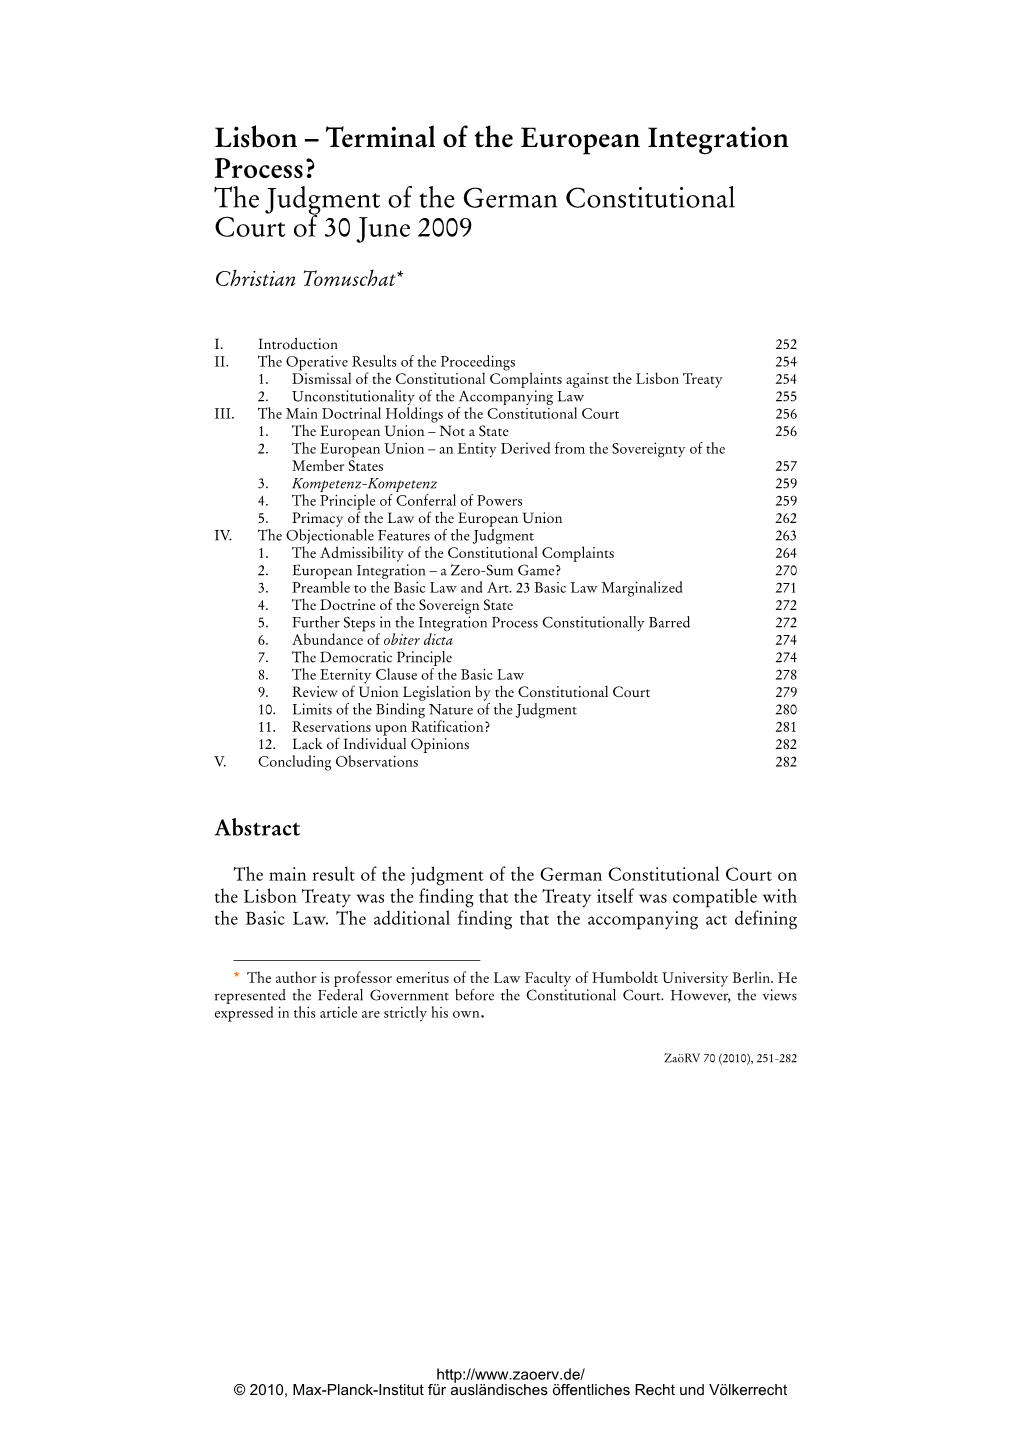 The Judgment of the German Constitutional Court of 30 June 2009